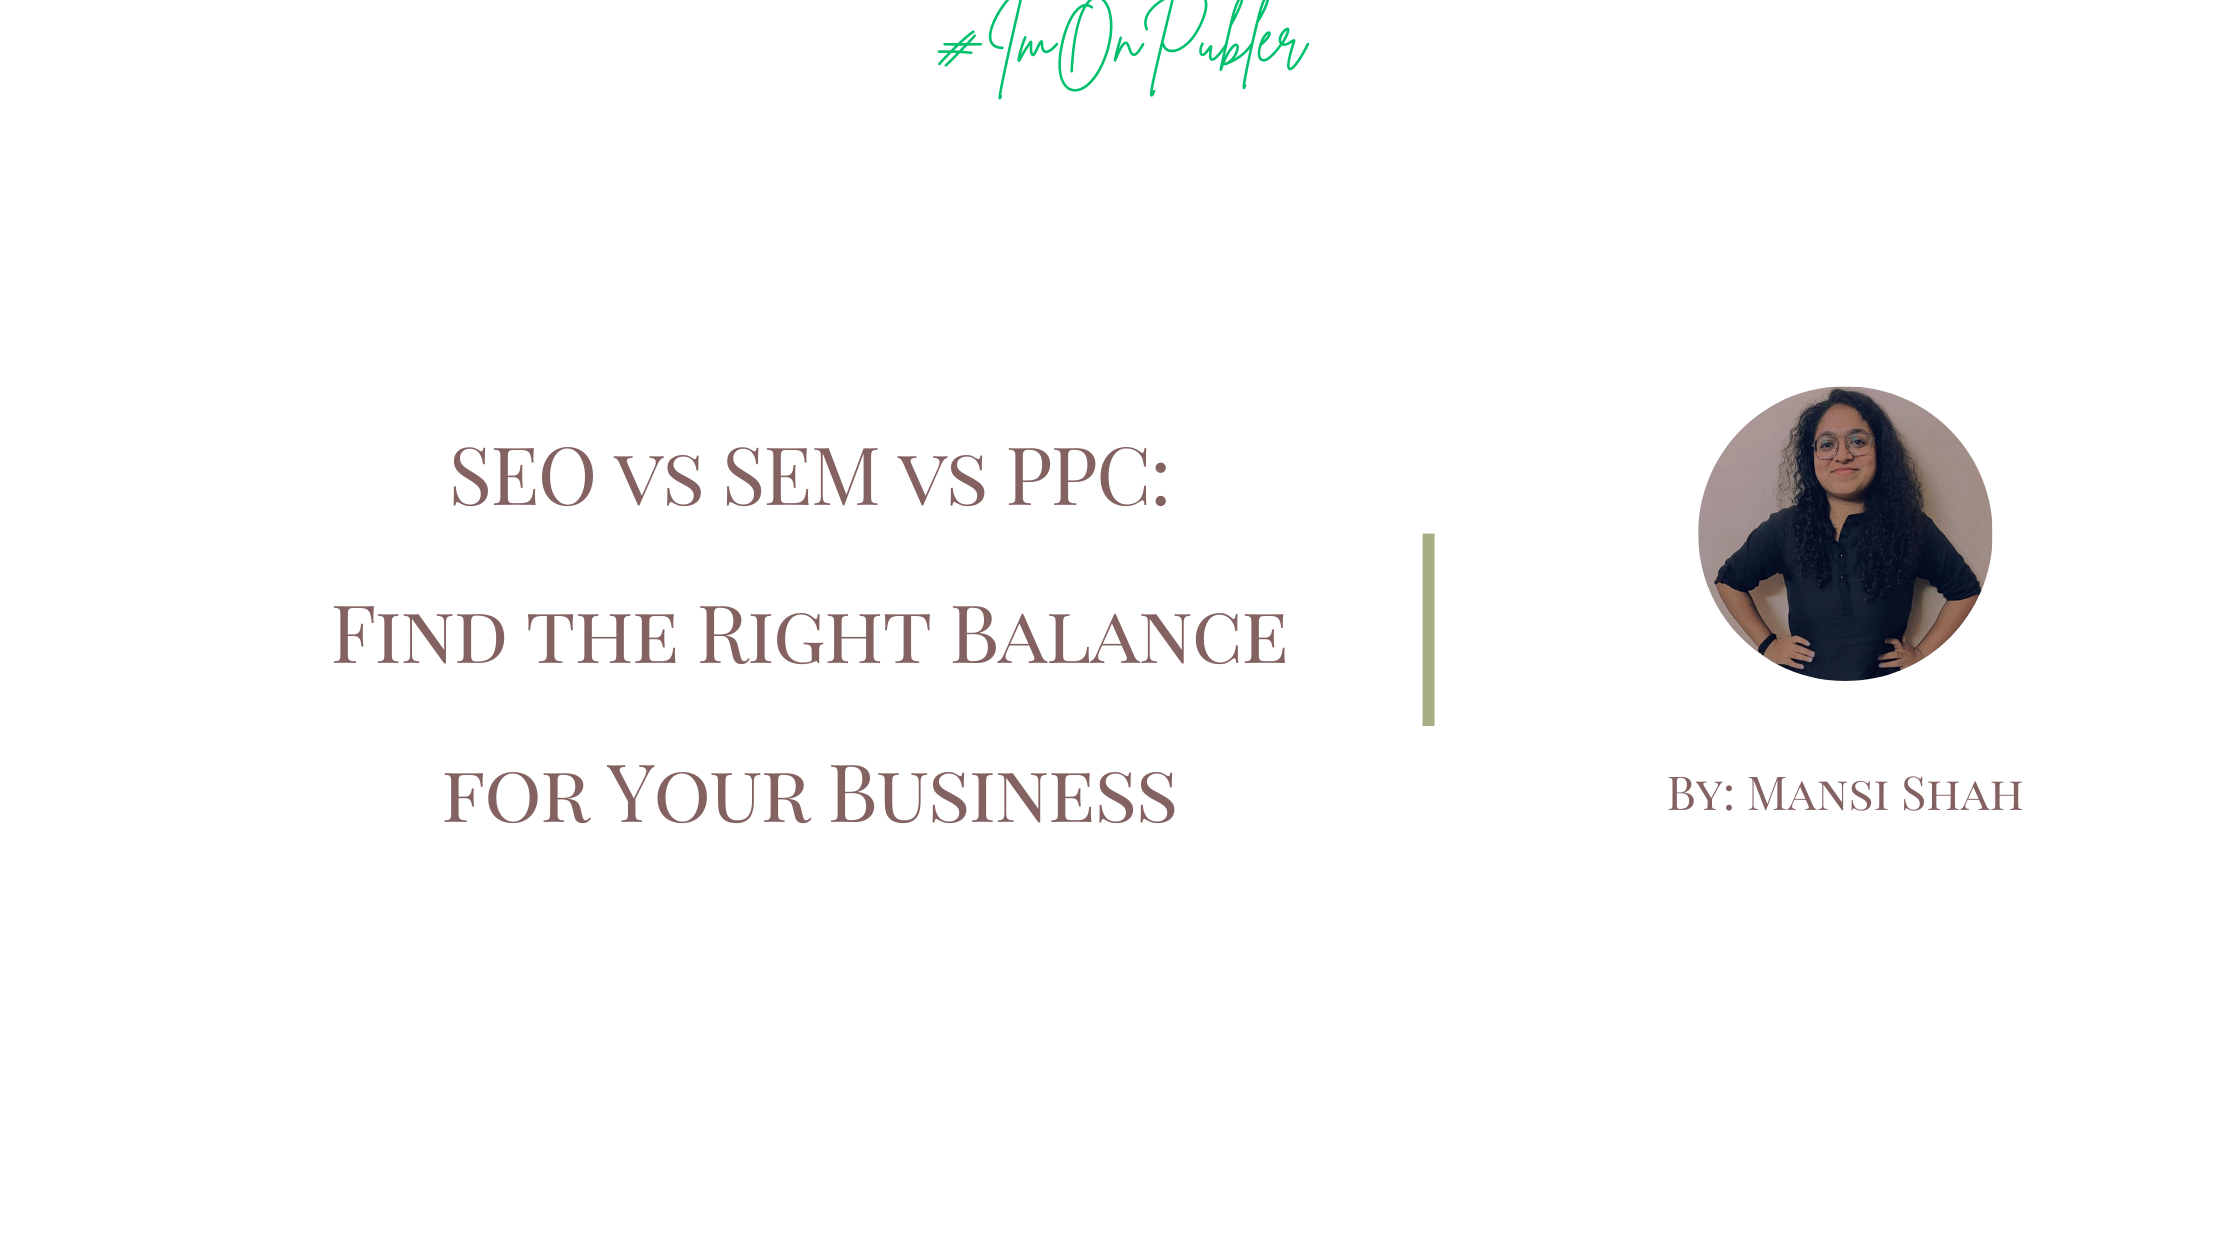 SEO vs SEM vs PPC: Find the Right Balance for Your Business by Mansi Shah